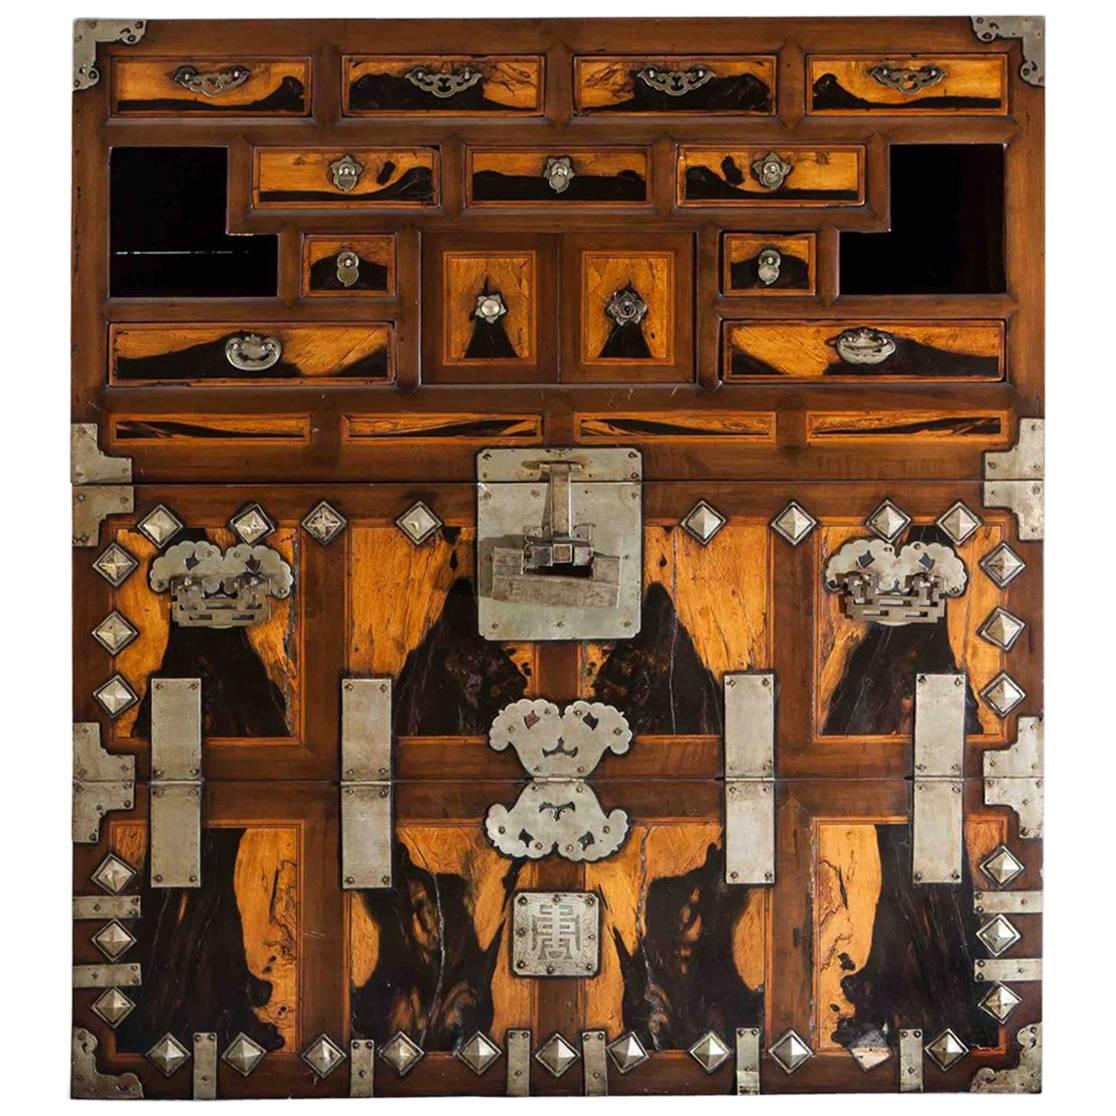 This very rare blanket and document storage chest is made from Persimmon and Zelkova
and was made in Korea in the 18th century.
Size: 17.25 x 40x 46 H

 